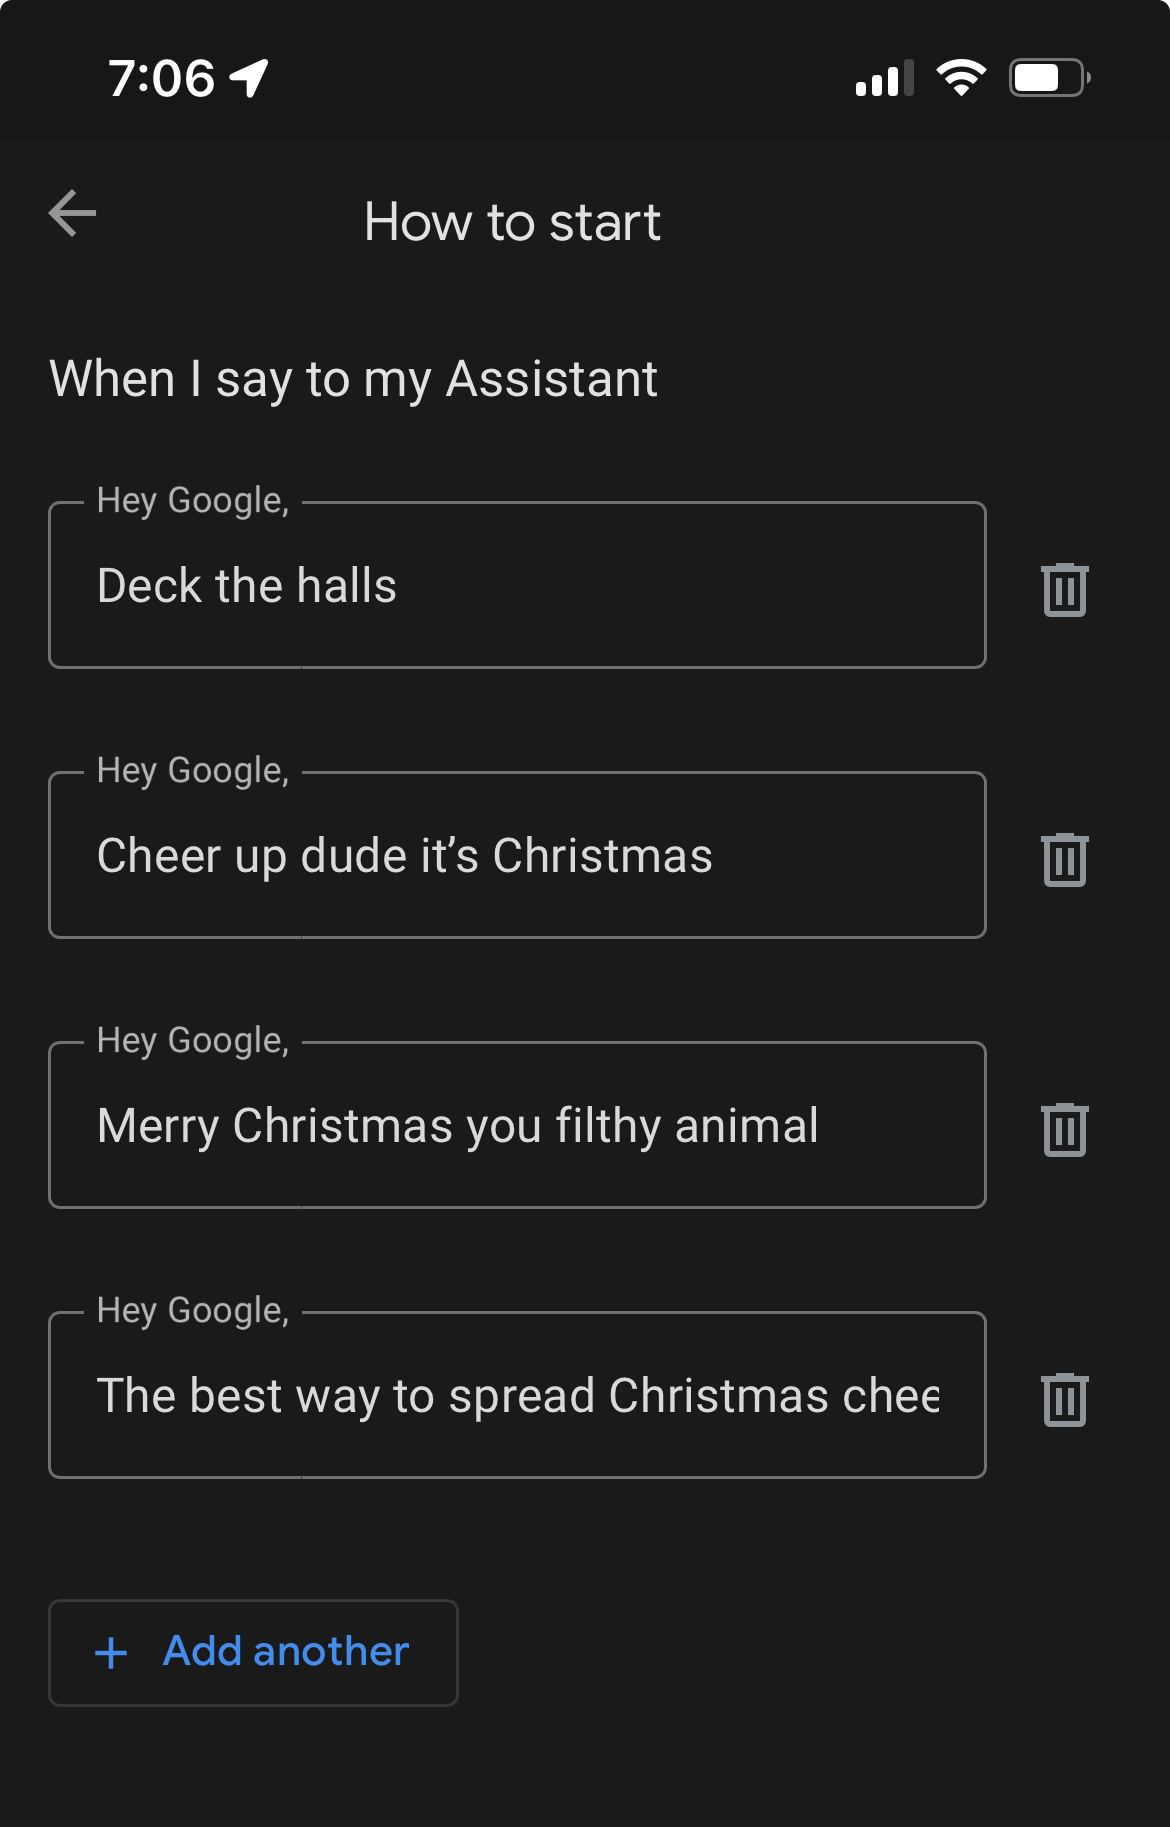 Google Home app screenshot When I say to my Assistant&10;Hey Google,&10;Deck the halls&10;回&10;Hey Google,&10;Cheer up dude it's Christmas&10;Hey Google,&10;Merry Christmas you filthy animal&10;Hey Google, -&10;The best way to spread Christmas chee